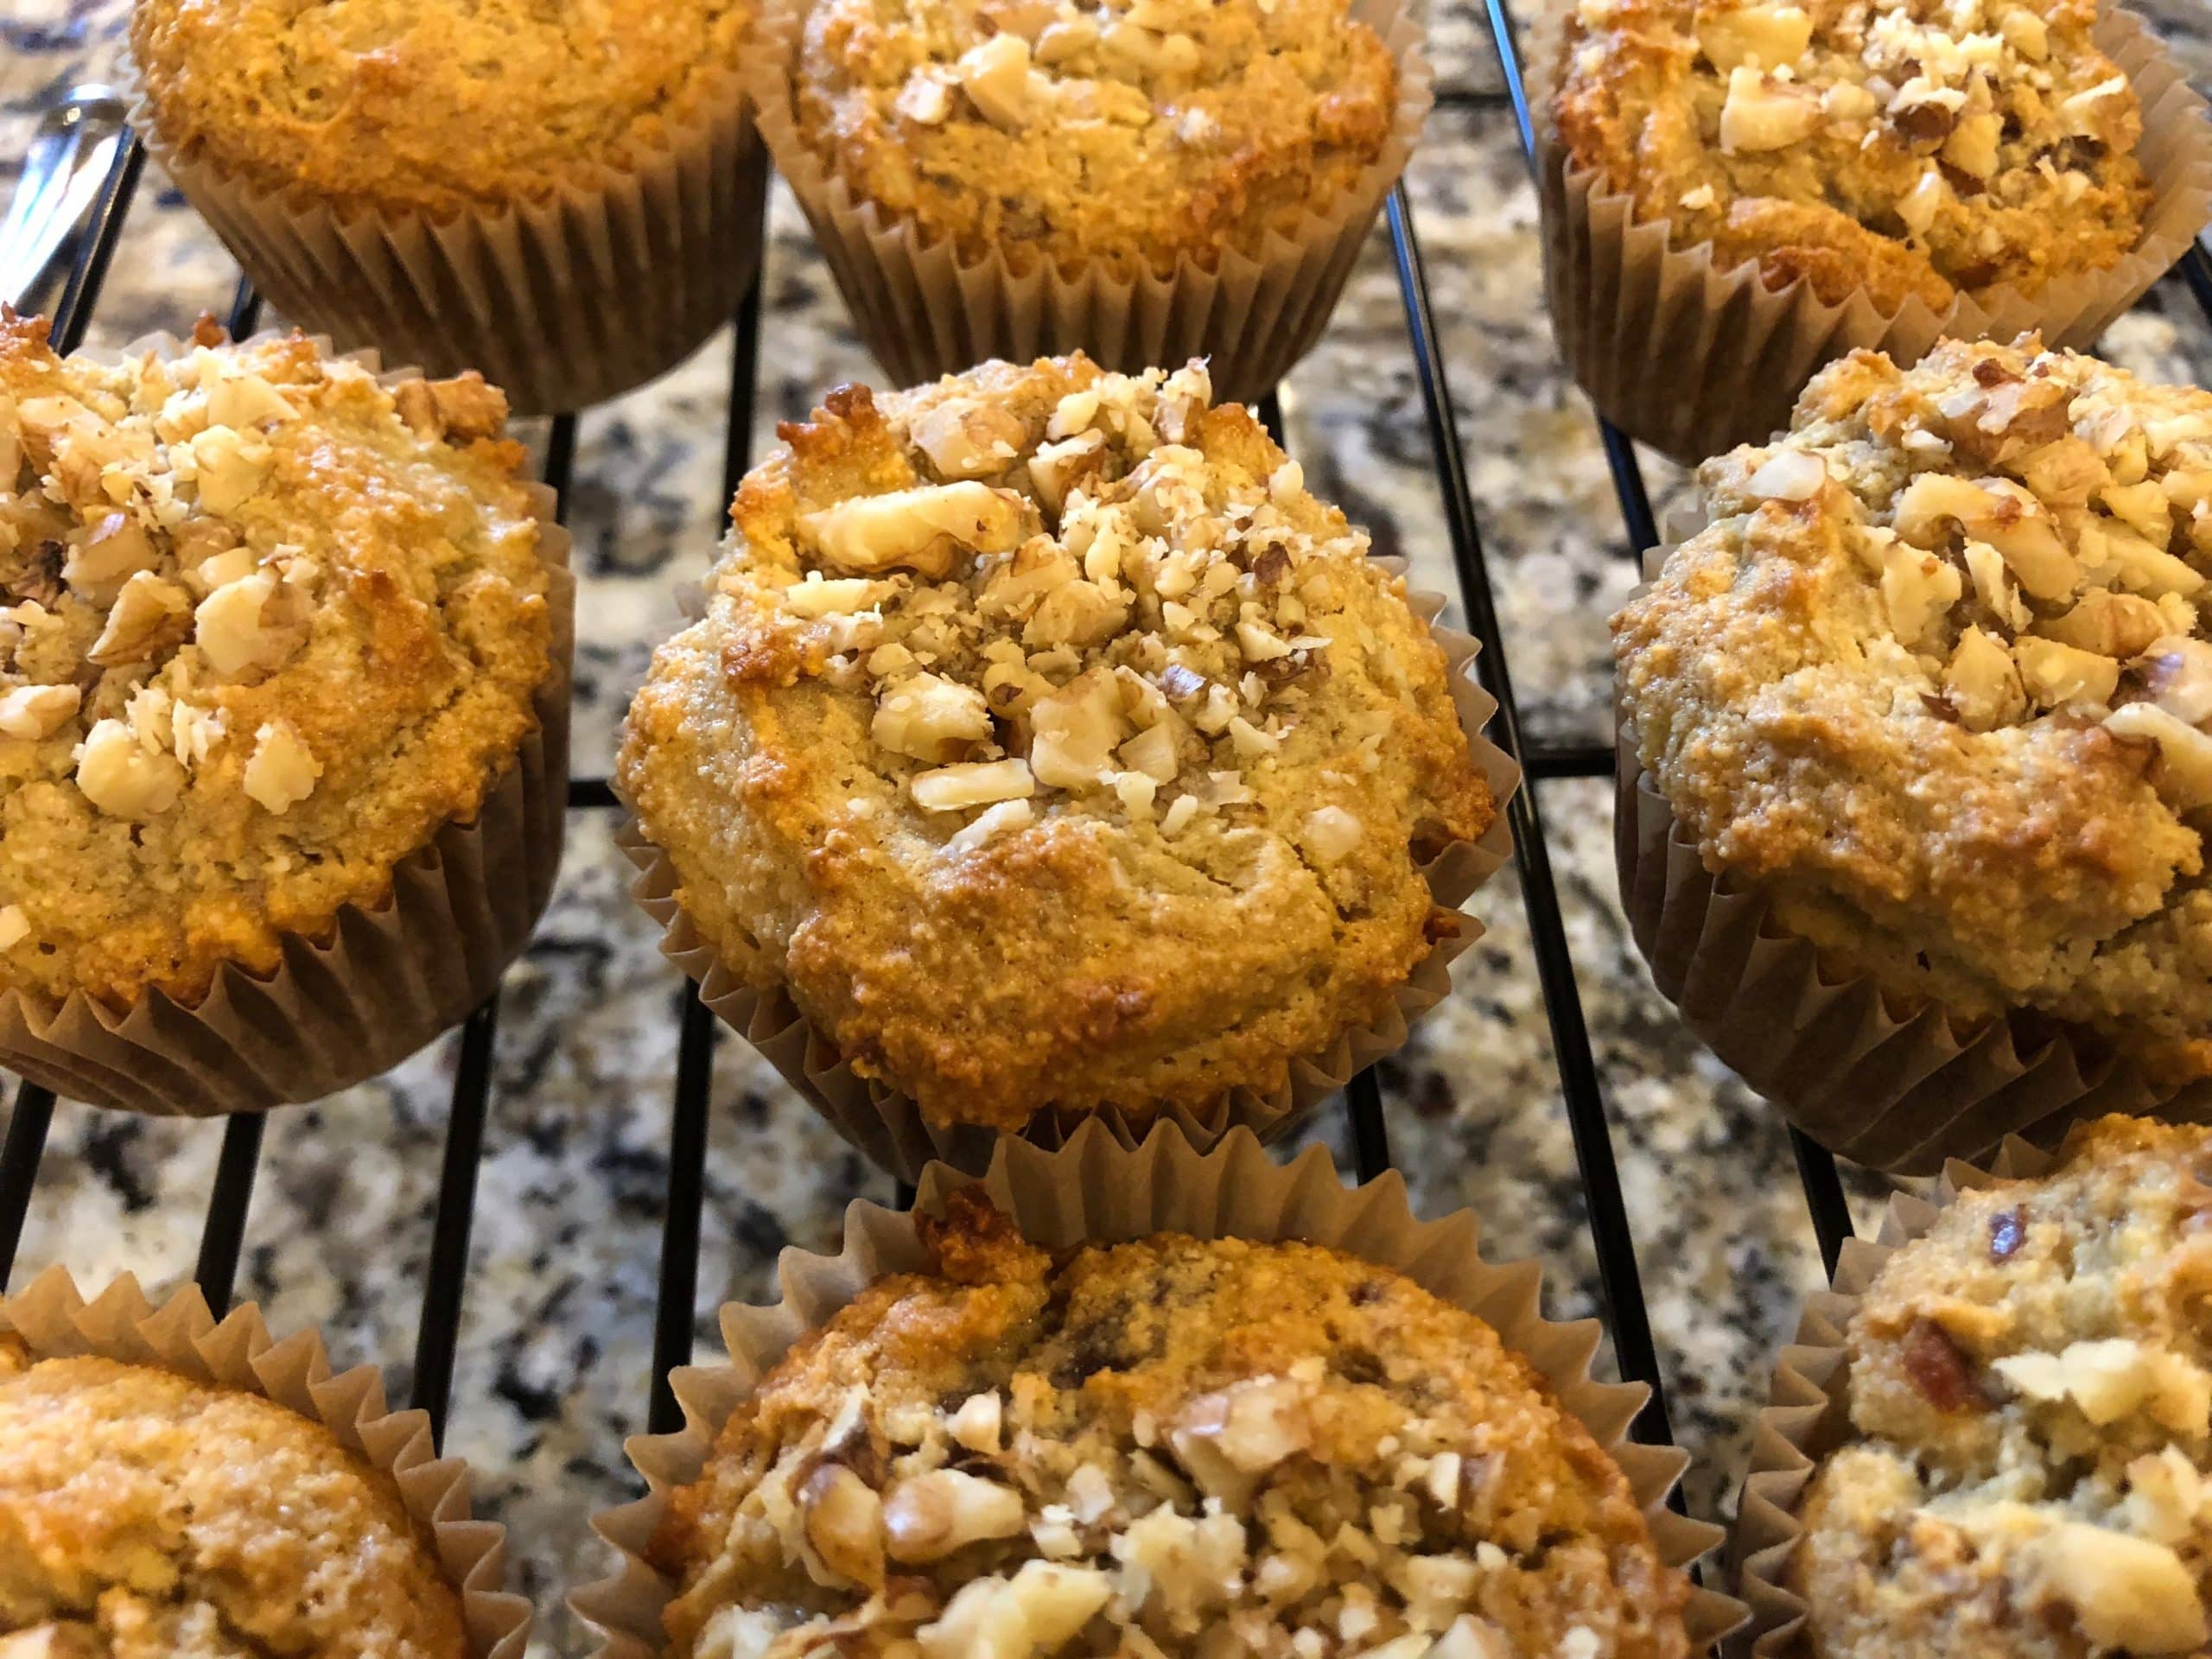 Banana Date Nut Muffin | Restoring Our Health